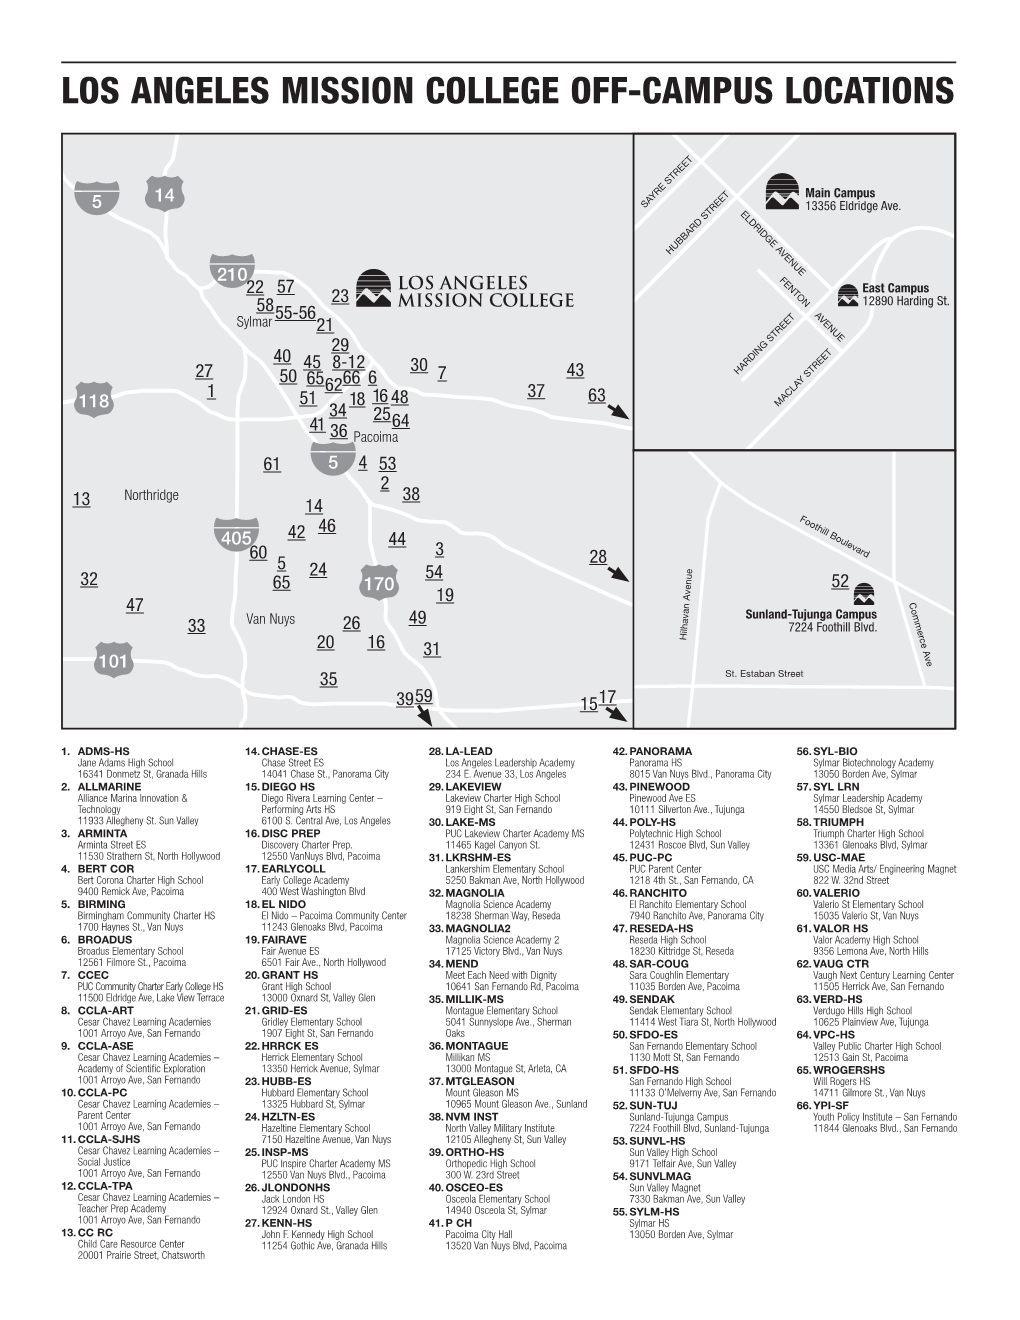 Los Angeles Mission College Off-Campus Locations